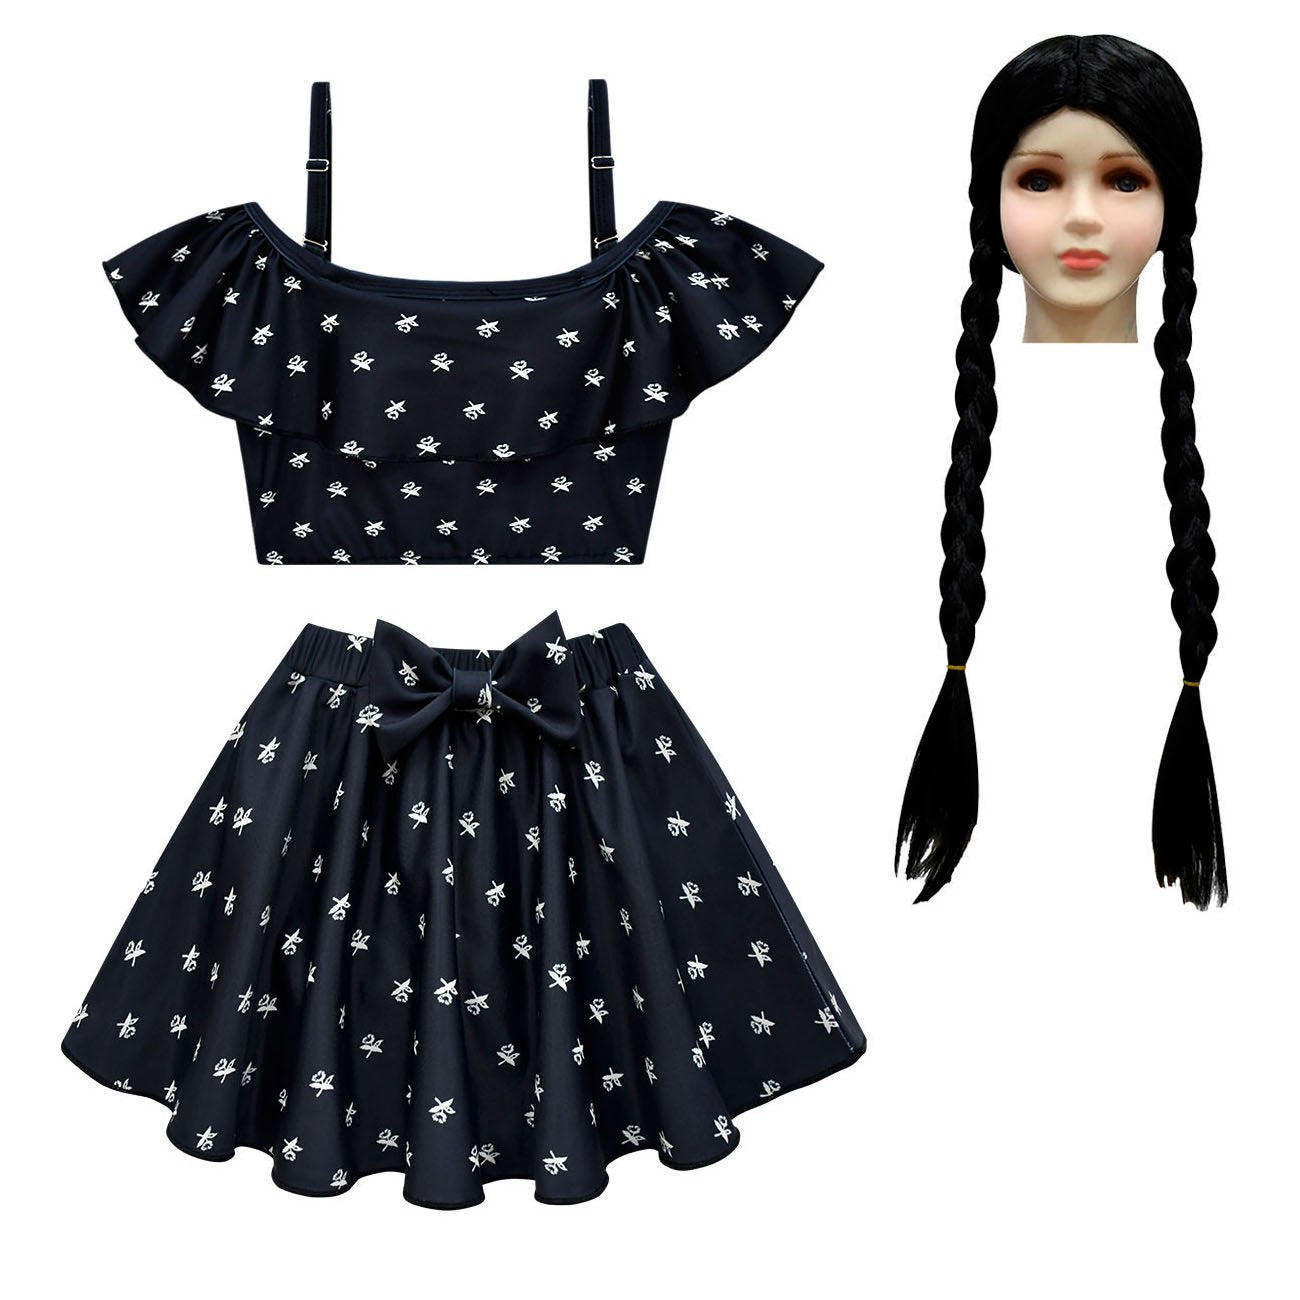 Wednesday Costume The Addams Family Cosplay Suspender Swimsuit Set For Kids